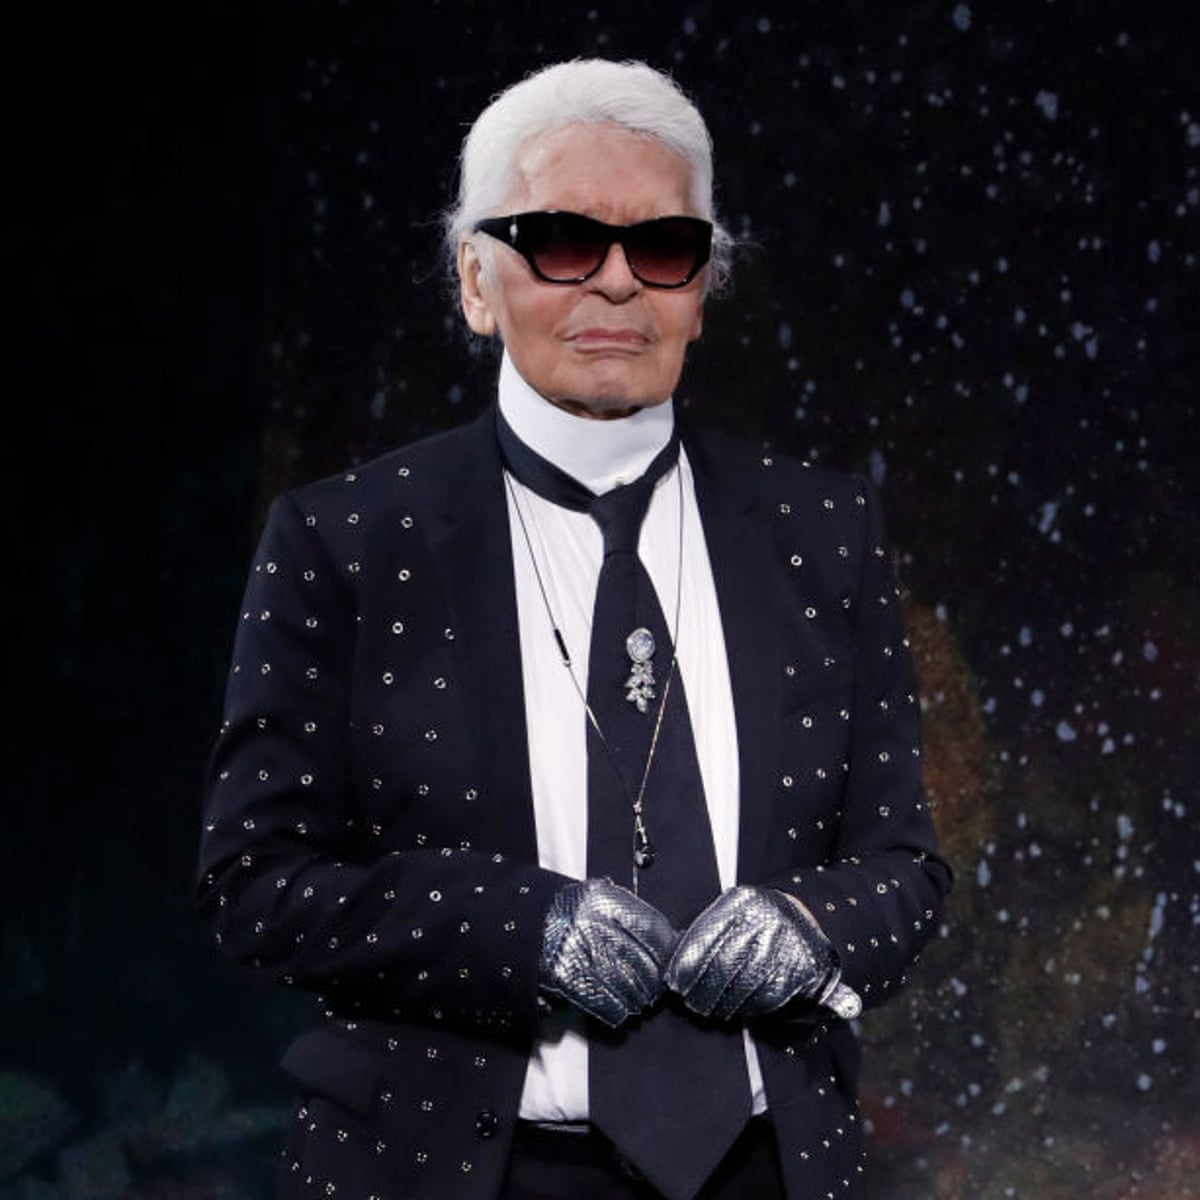 Flex your creativity': the Met Gala and Karl Lagerfeld collide